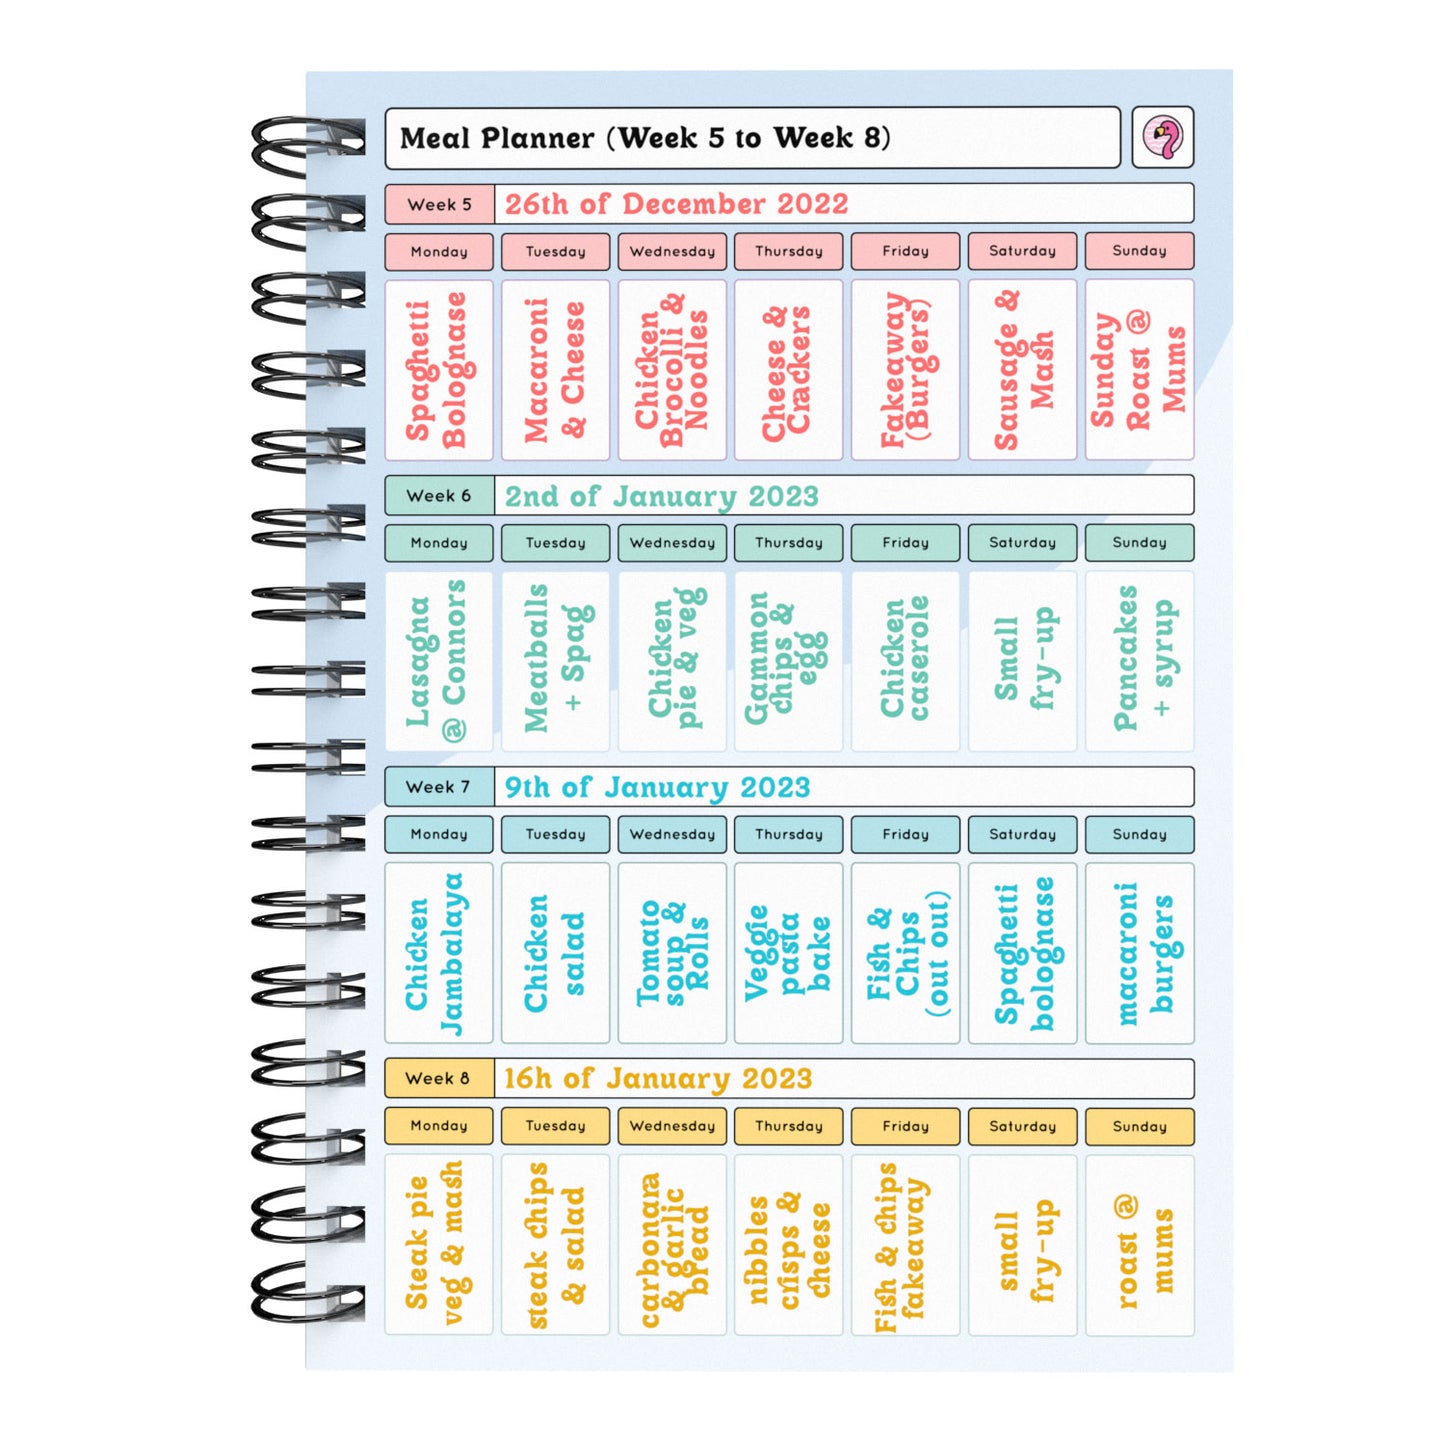 Food Diary - C39 - Calorie Counting